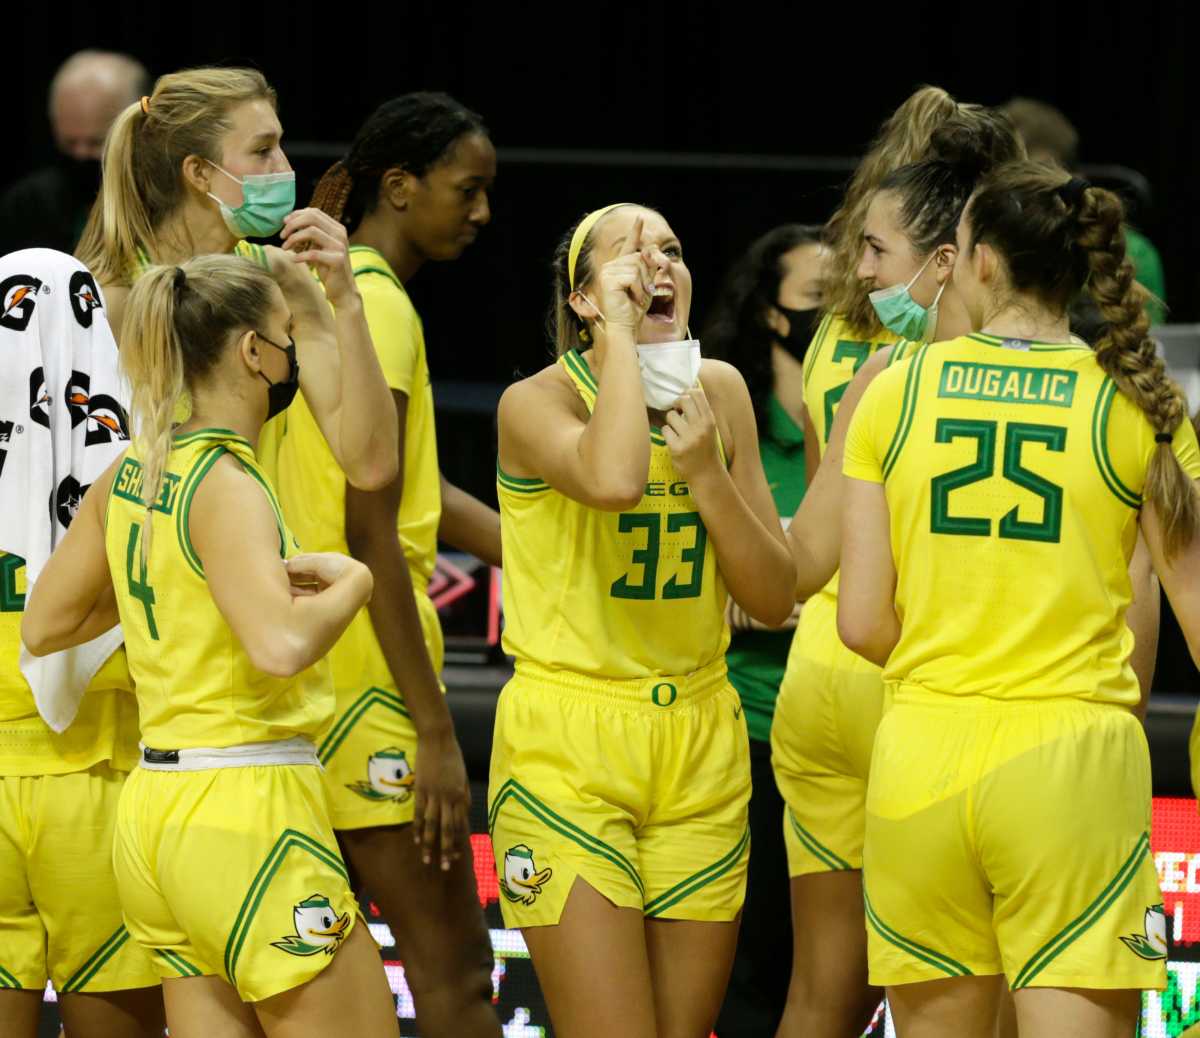 Sydney Parrish points to the score board alongside her teammates after the Ducks dispatched Utah 85-43